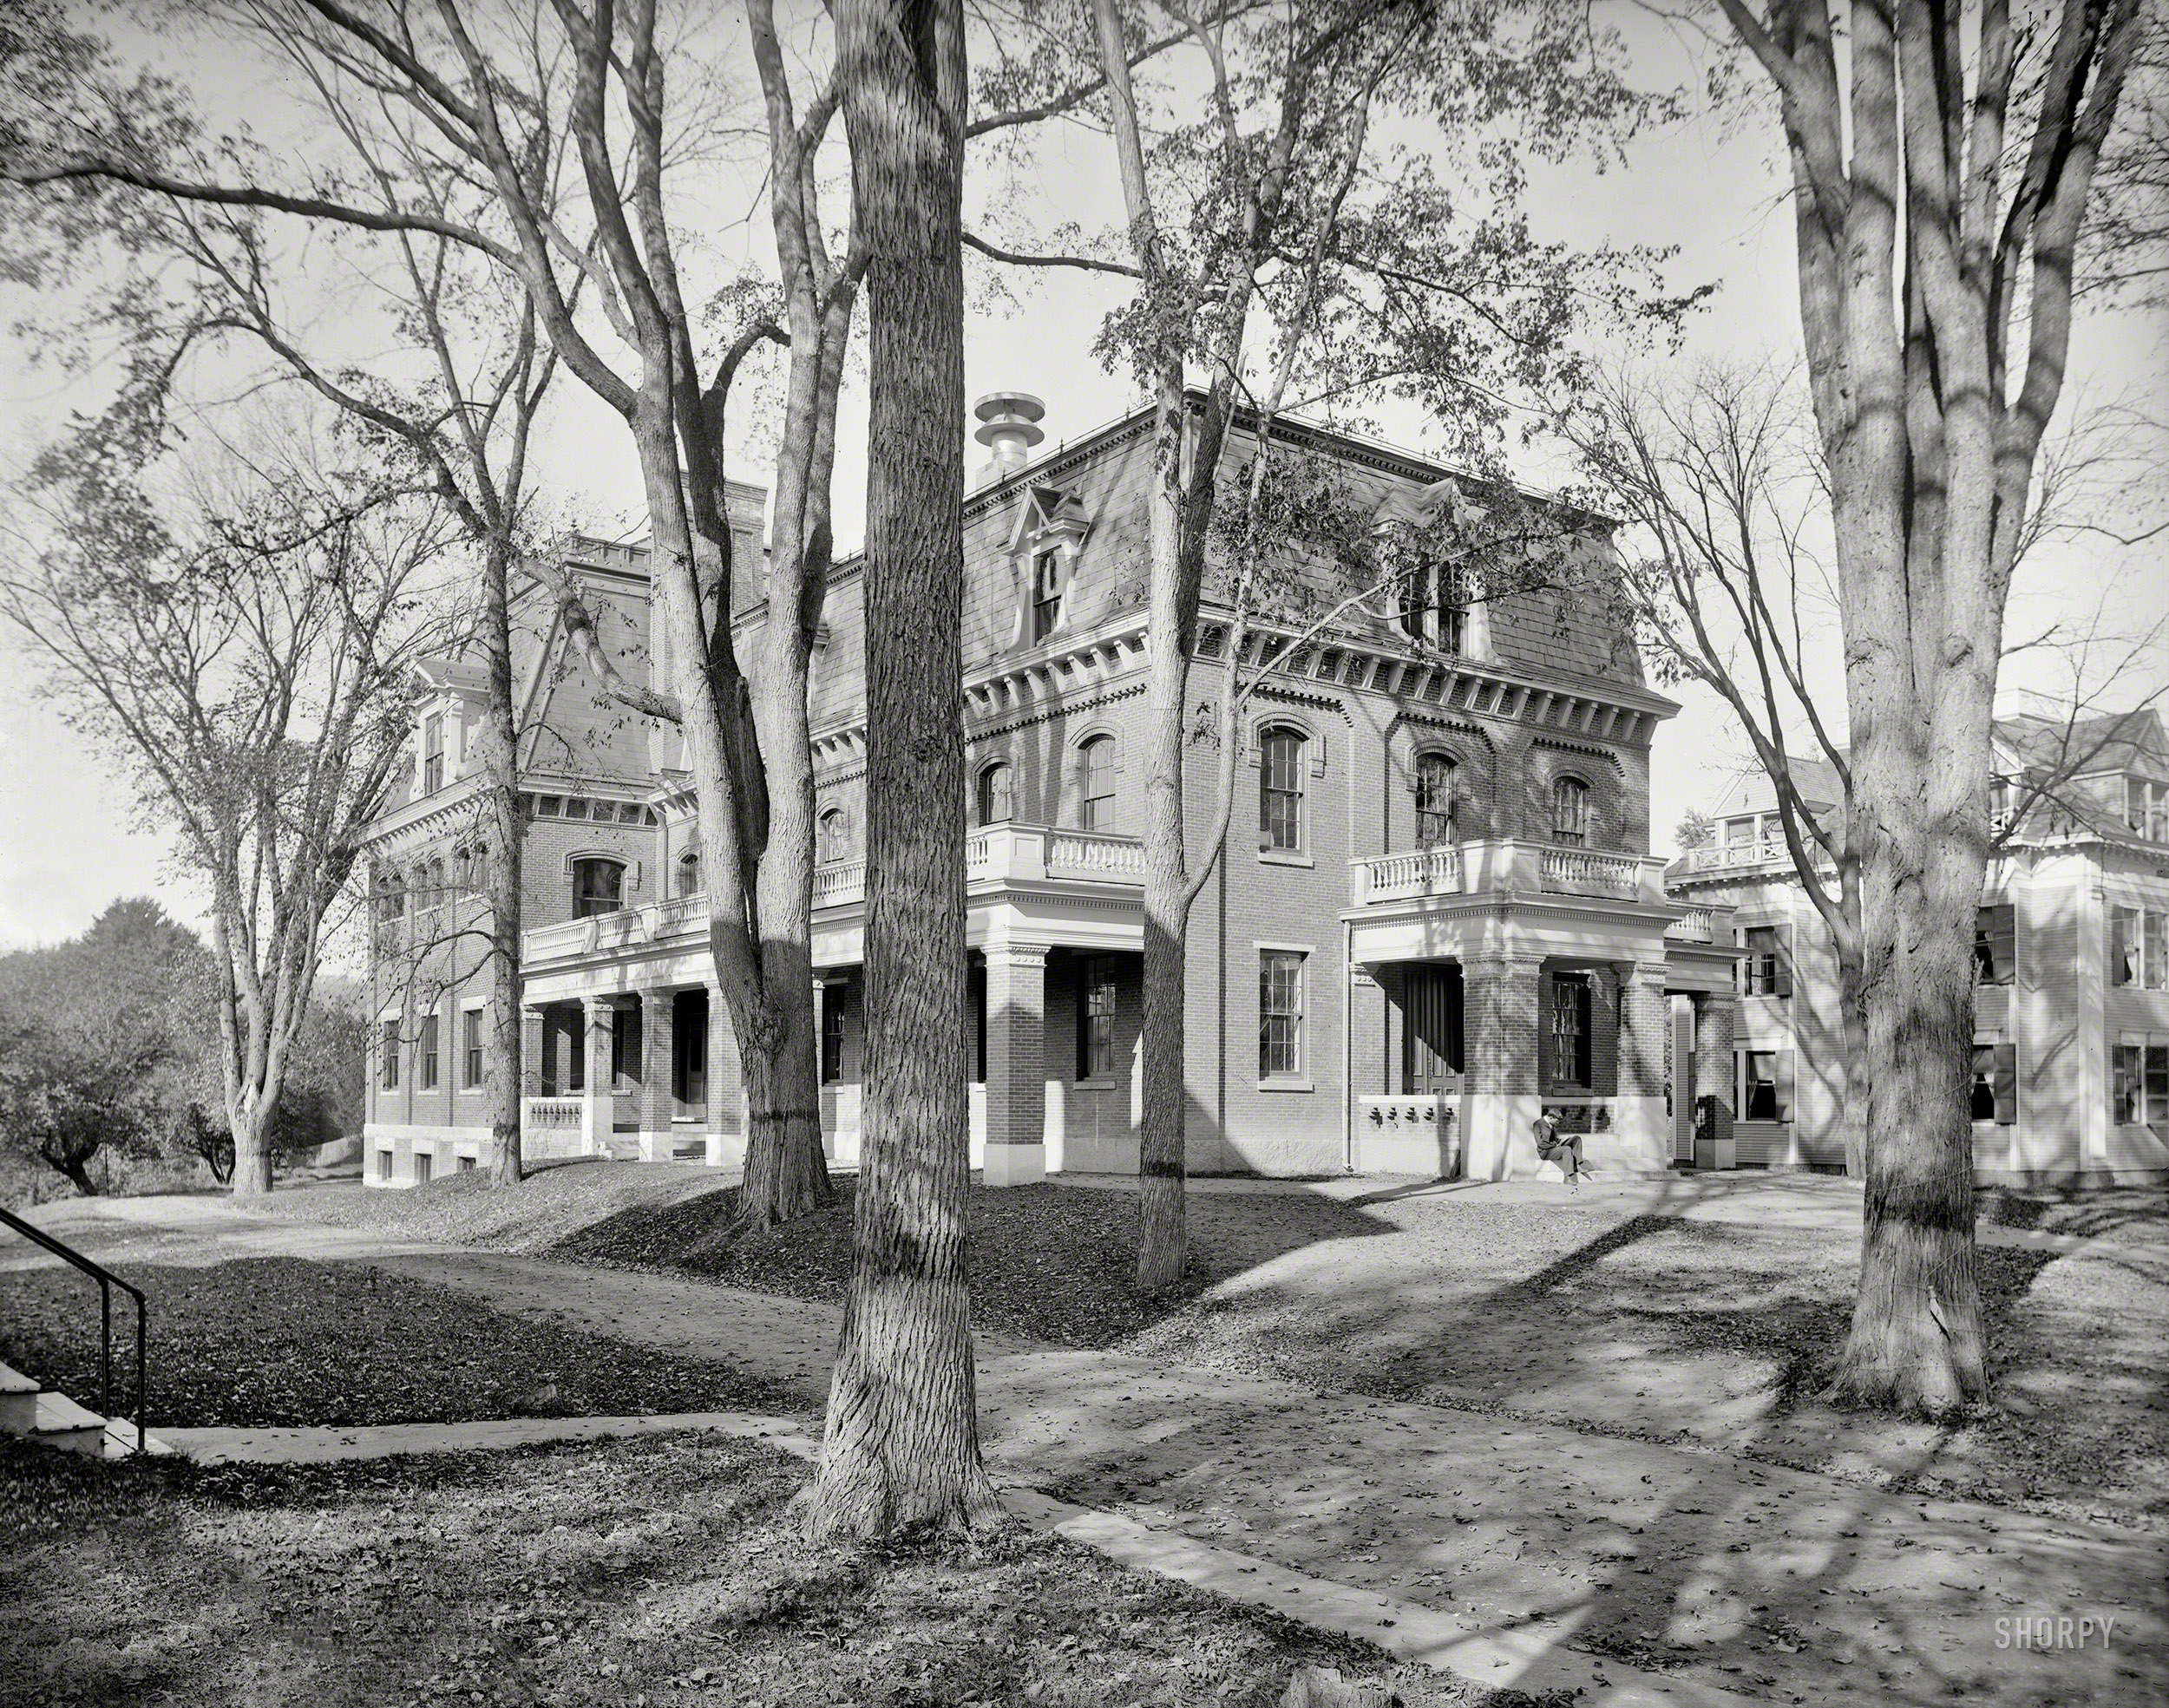 Hanover, New Hampshire, circa 1901. "Chandler Hall, Dartmouth College." 8x10 inch dry plate glass negative, Detroit Publishing Company. View full size.